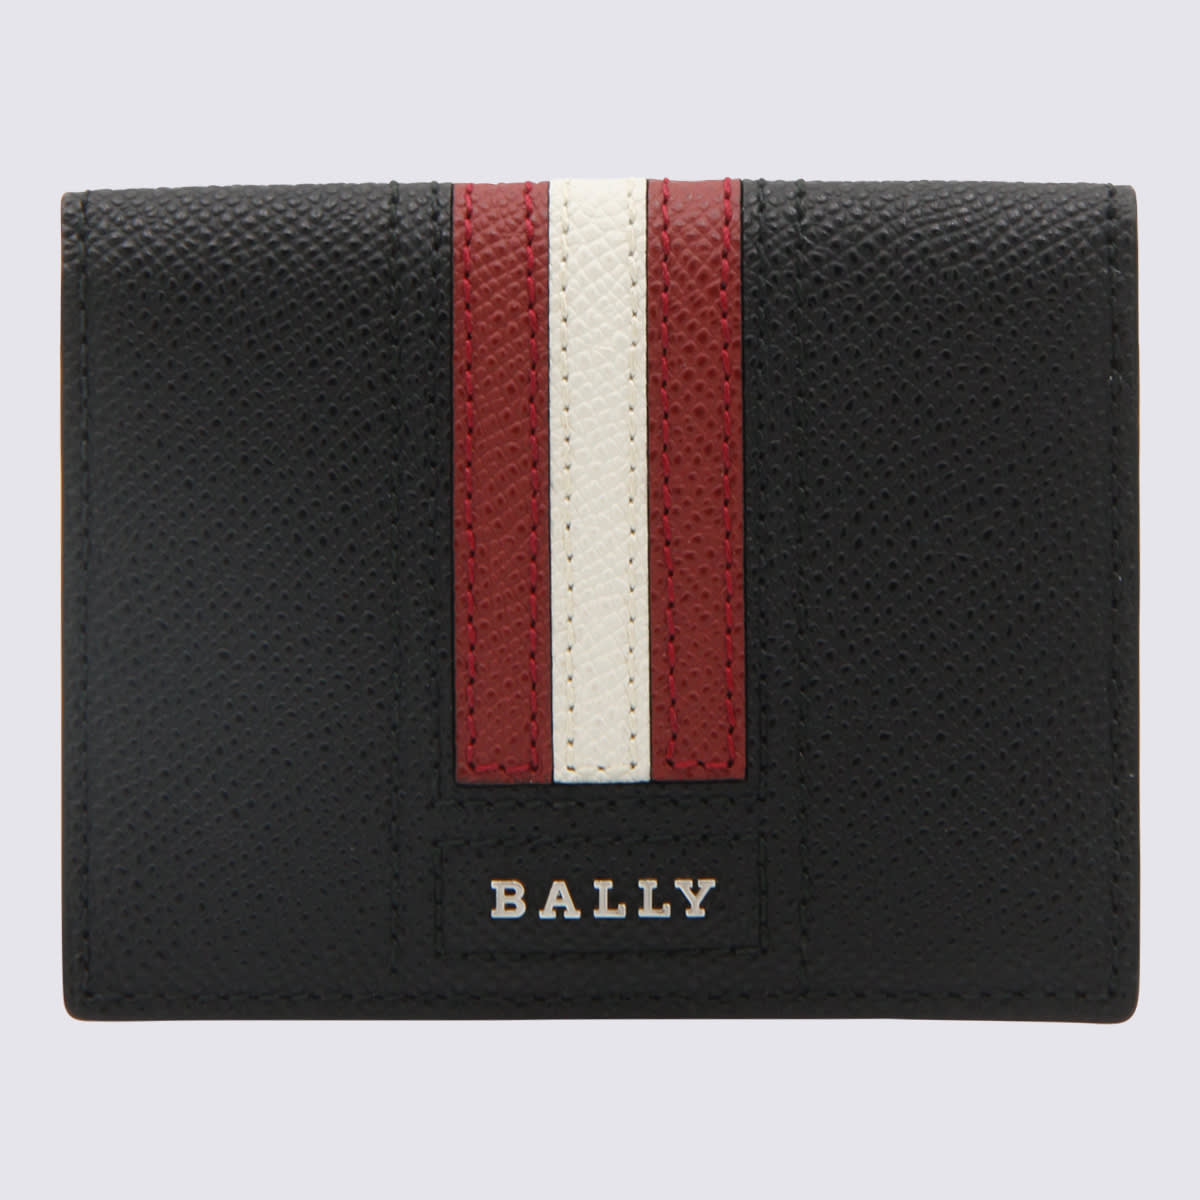 Bally Black, White And Red Leather Wallet